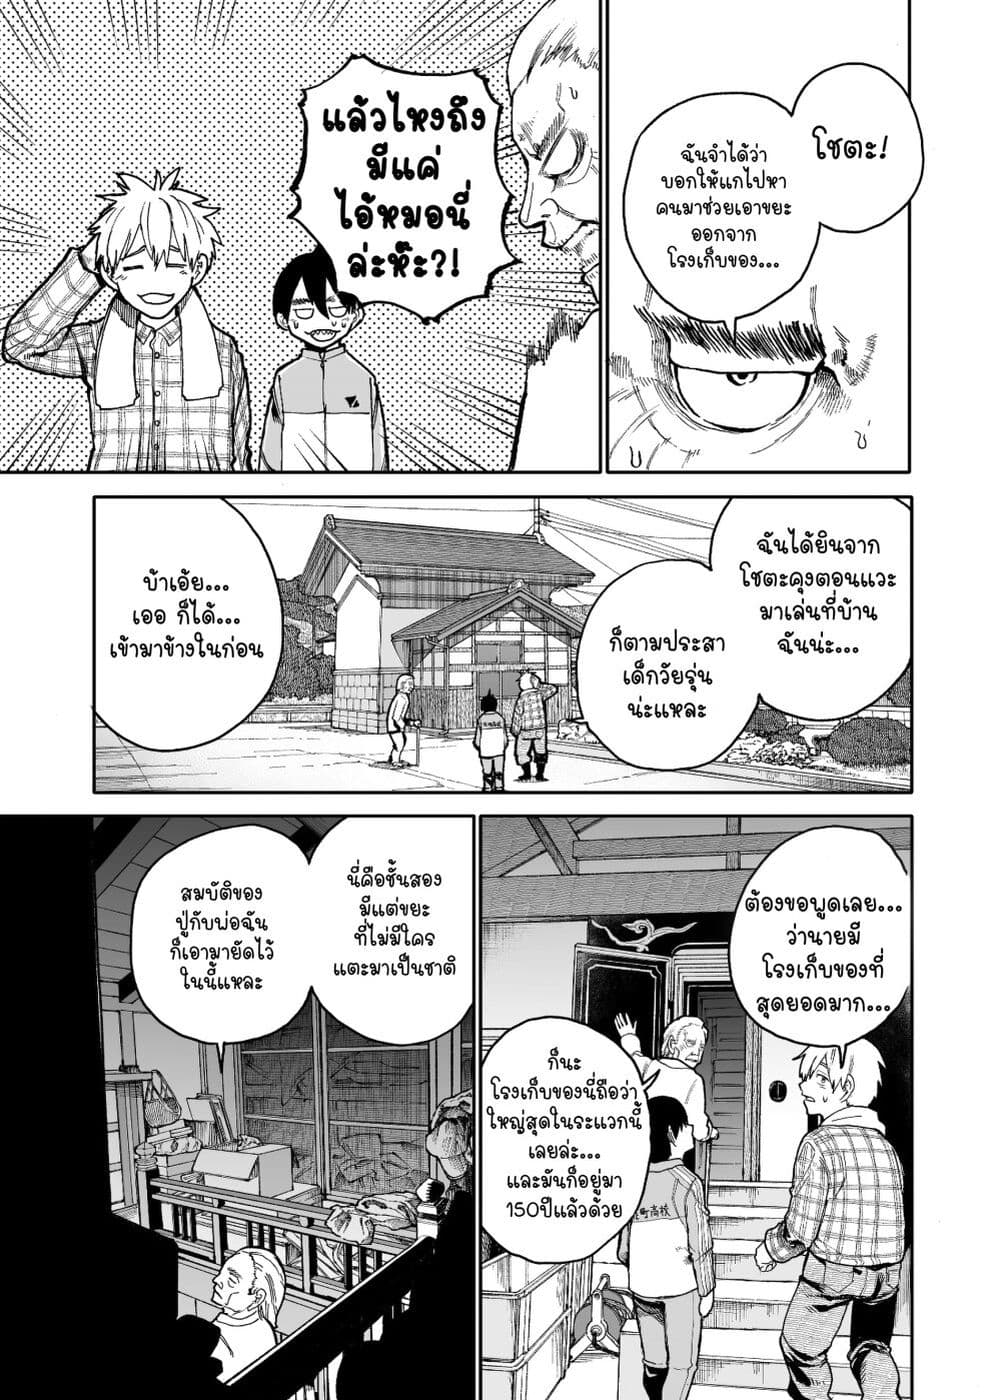 A Story About A Grampa and Granma Returned Back to their Youth คู่รักวัยดึกหวนคืนวัยหวาน 61-61